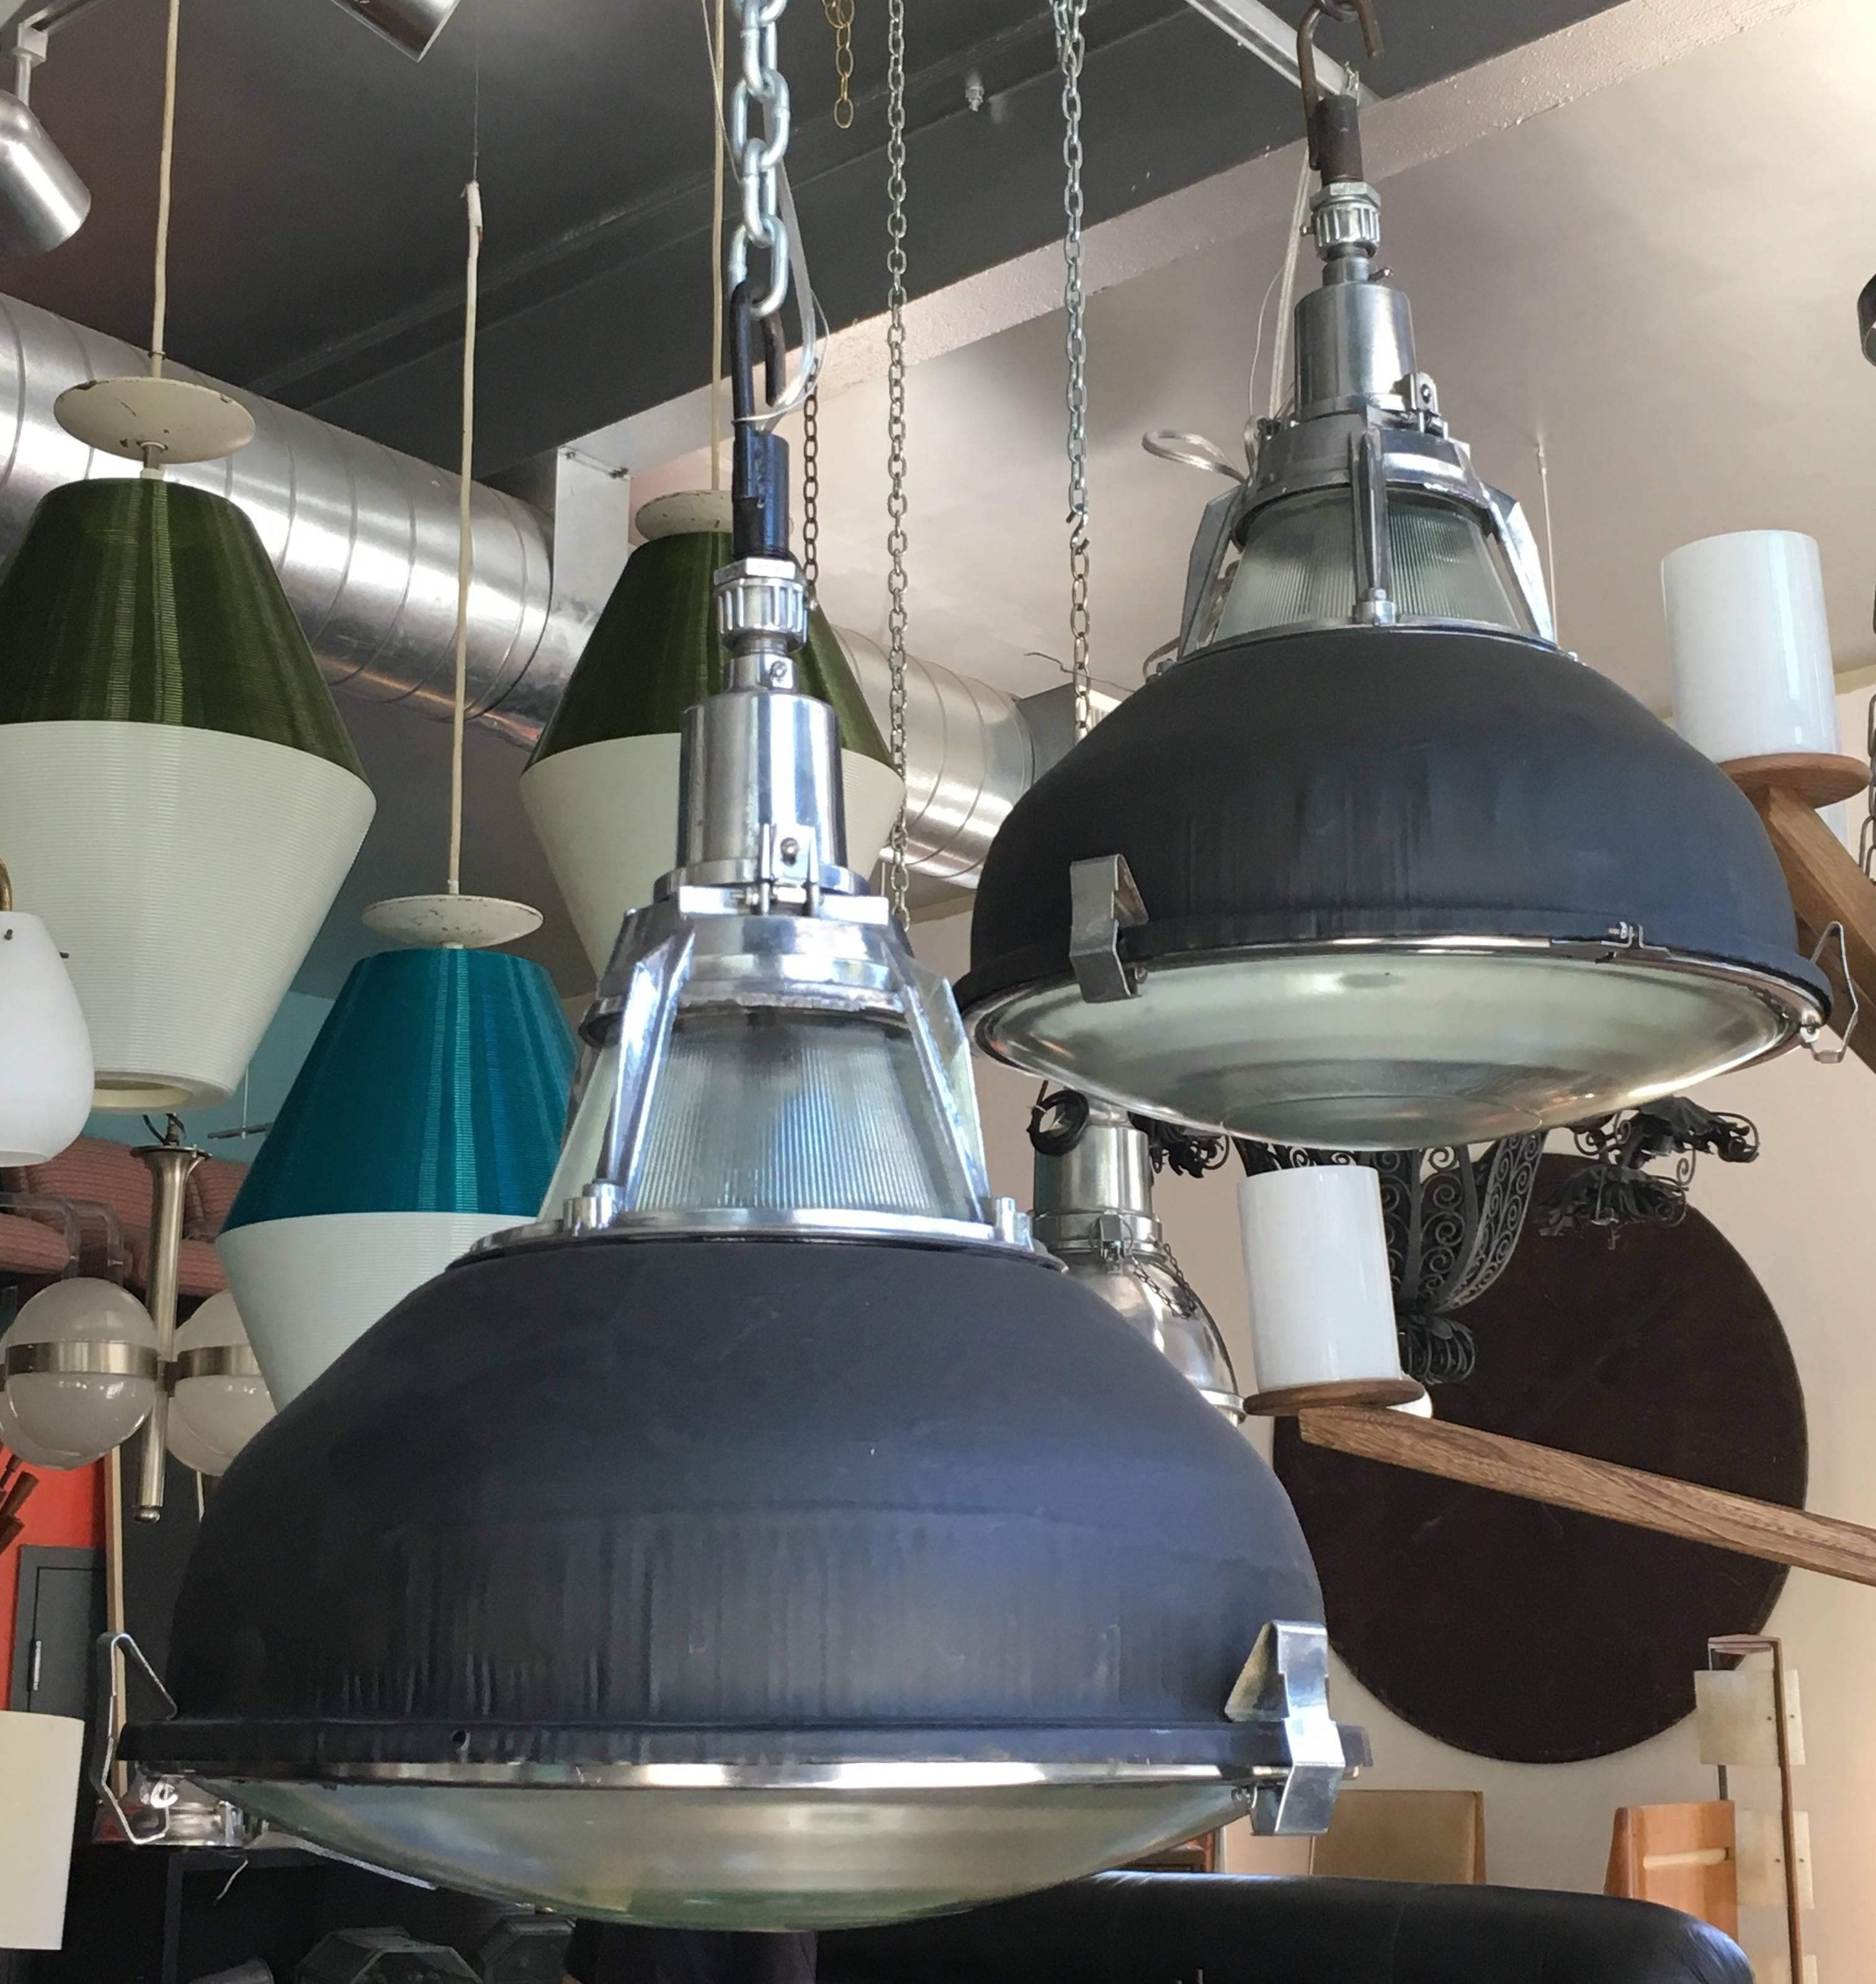 French industrial pendant lights each with two-piece of original glass; spun aluminum shade (shown in matte black) can be custom color.
Pair available.
Avantgarden Ltd. cultivates unexpected and exceptional lighting, furniture and design.  To view